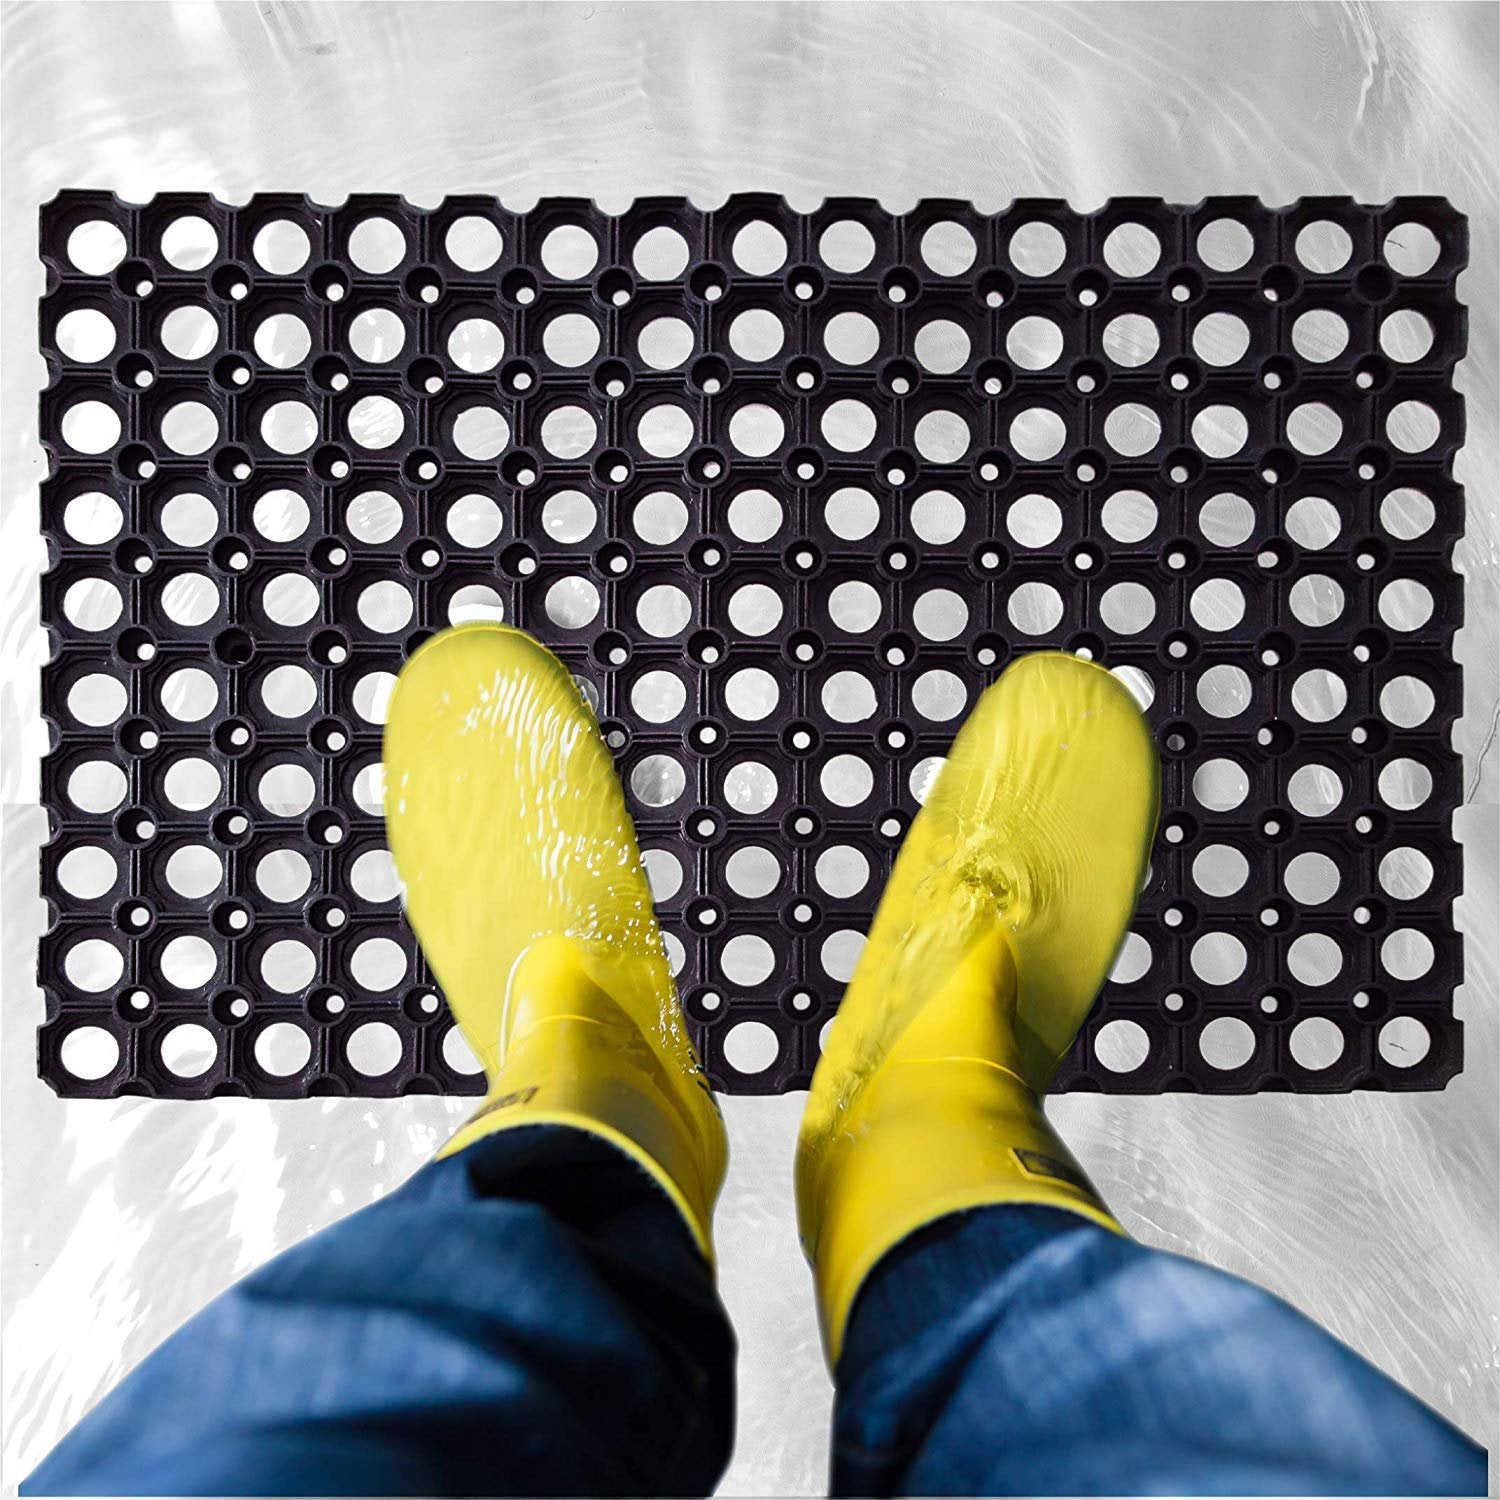 3FT*5FT Heavy Duty Workshop Anti Fatigue Drainage Safety Rubber Mats -  China Rubber Sheet, Rubber Floor